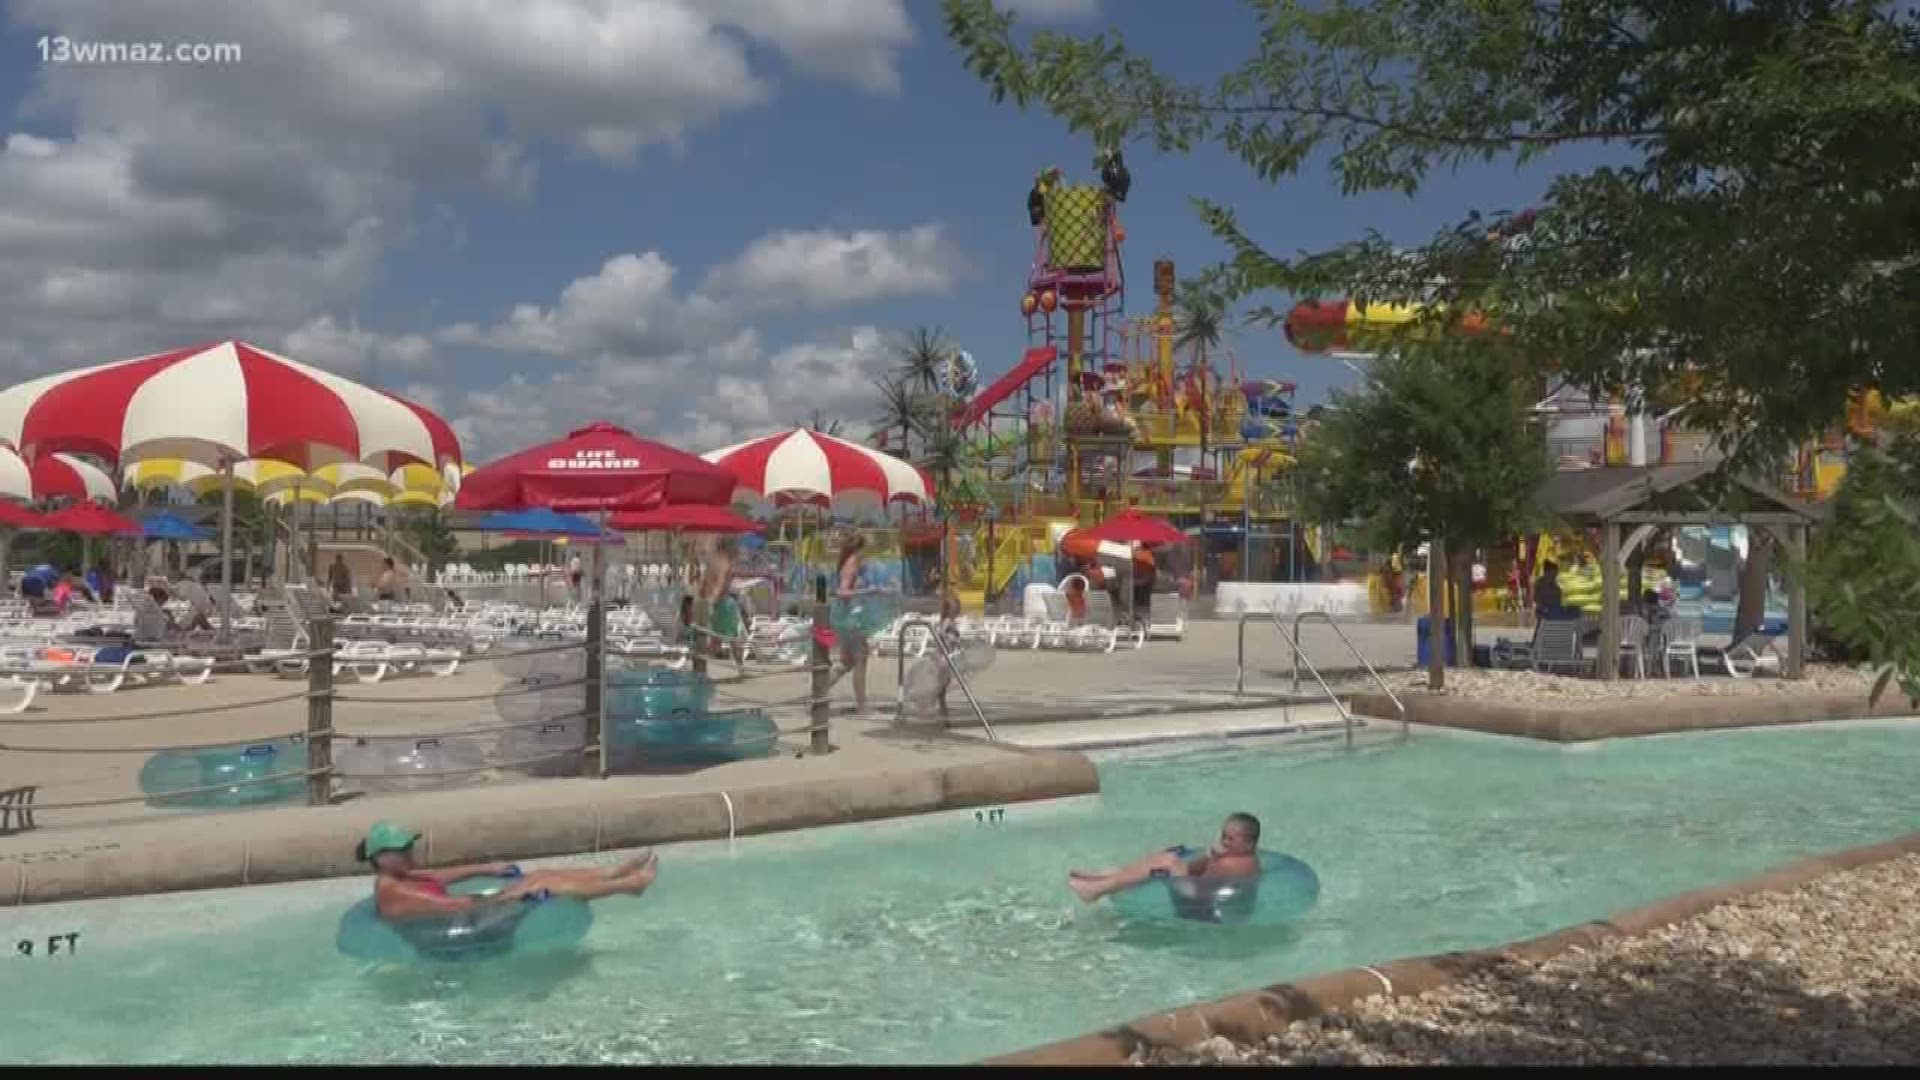 A Facebook post over the weekend claims a child got sick after a day at Rigby's Water World. The post has since gotten over 5,000 shares and 1,000 likes, but we wanted to know if the illness was linked to the water park.